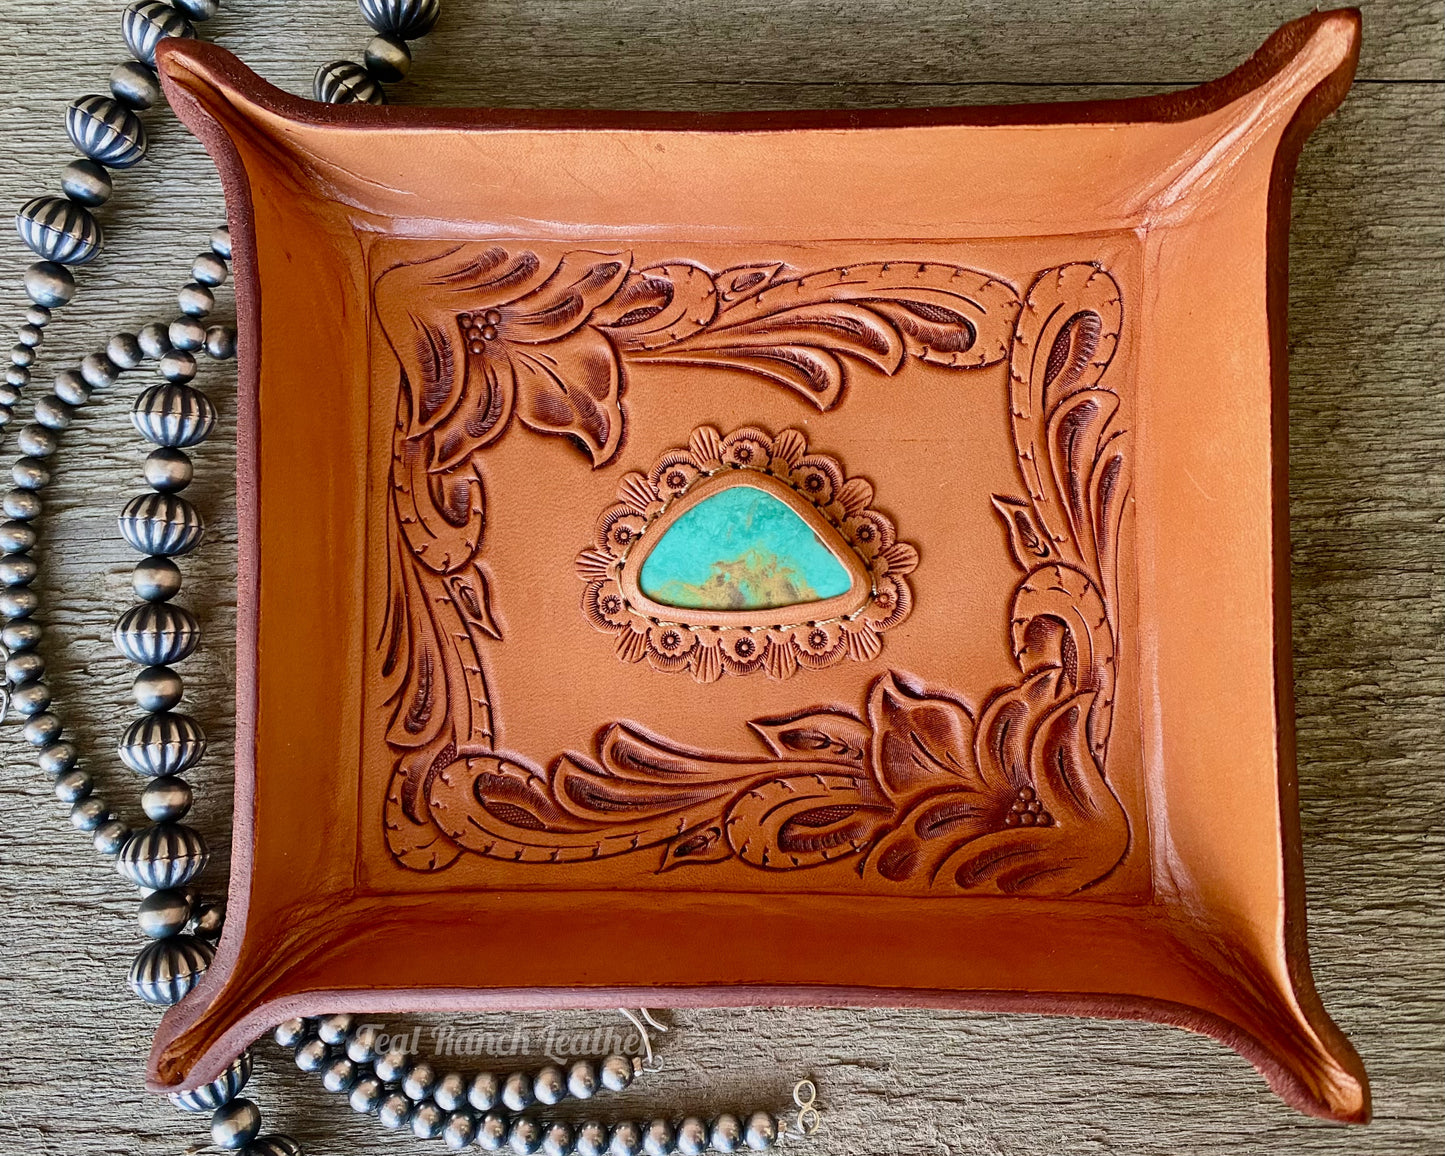 Turquoise and Leather Jewelry Bowls